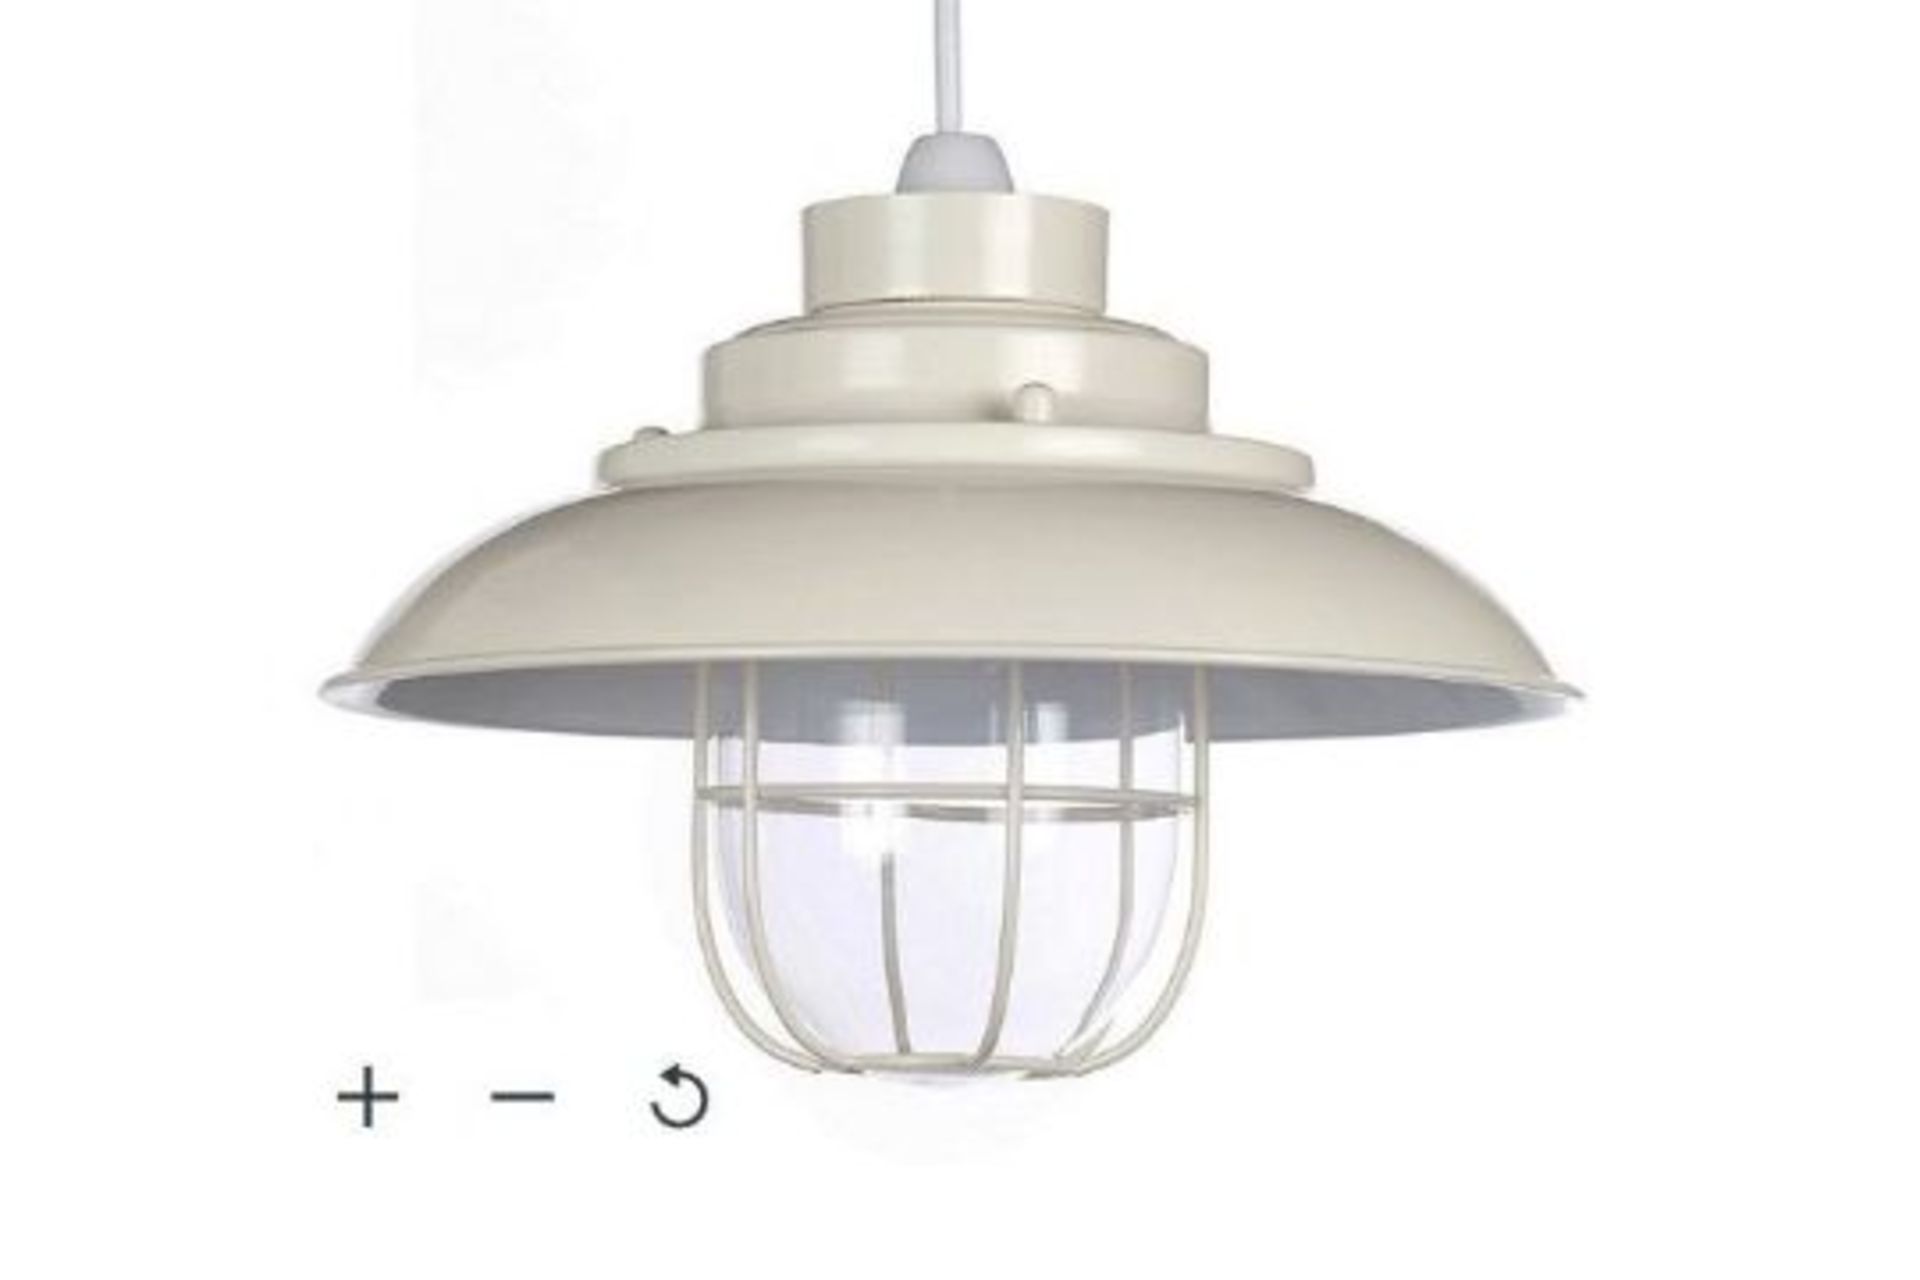 Worcester Metal Cream Fisherman Non Electrical Vintage Ceiling Pendant/Light. - ER45. This